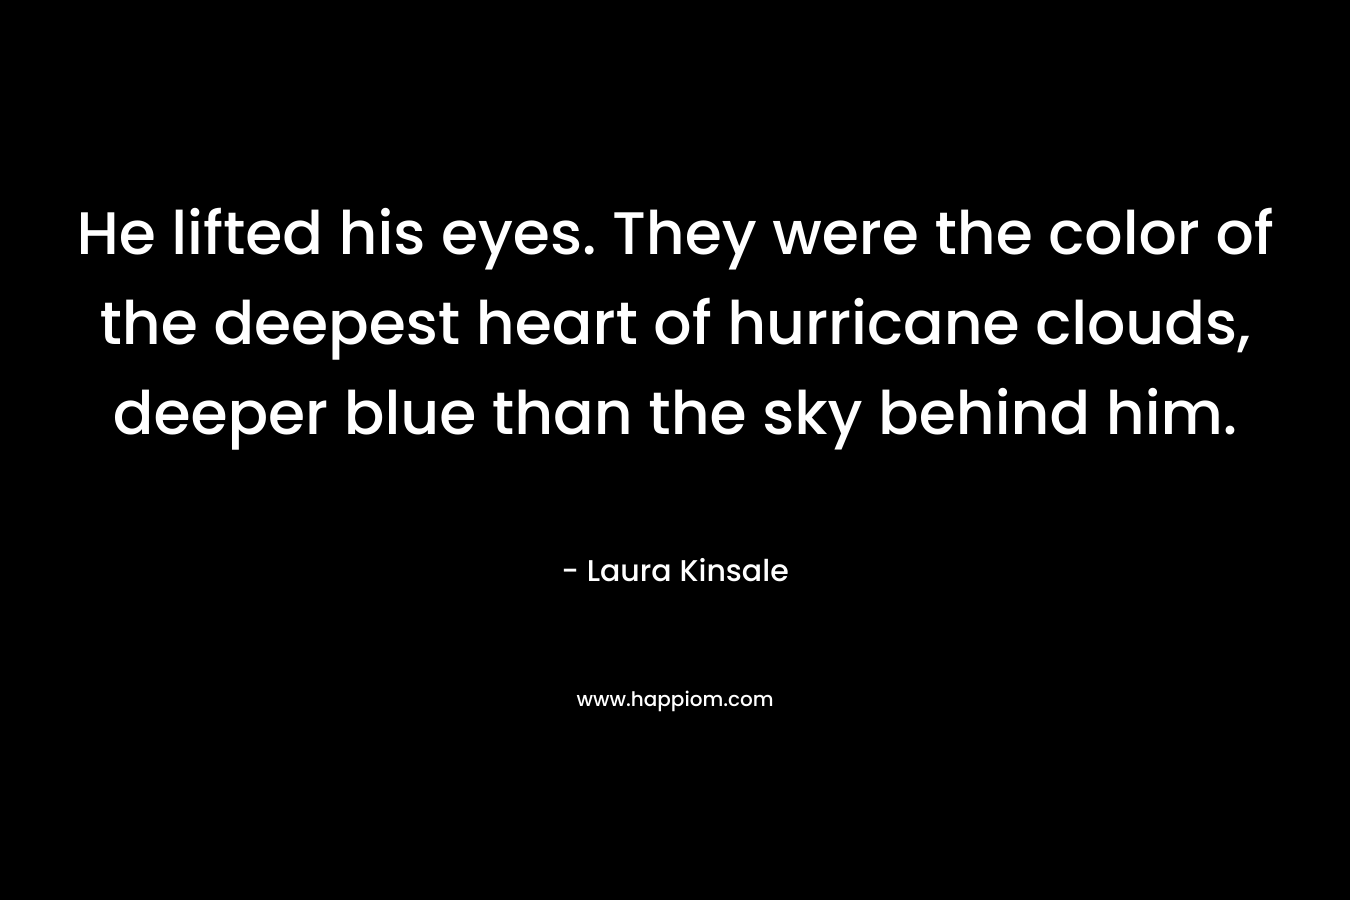 He lifted his eyes. They were the color of the deepest heart of hurricane clouds, deeper blue than the sky behind him. – Laura Kinsale